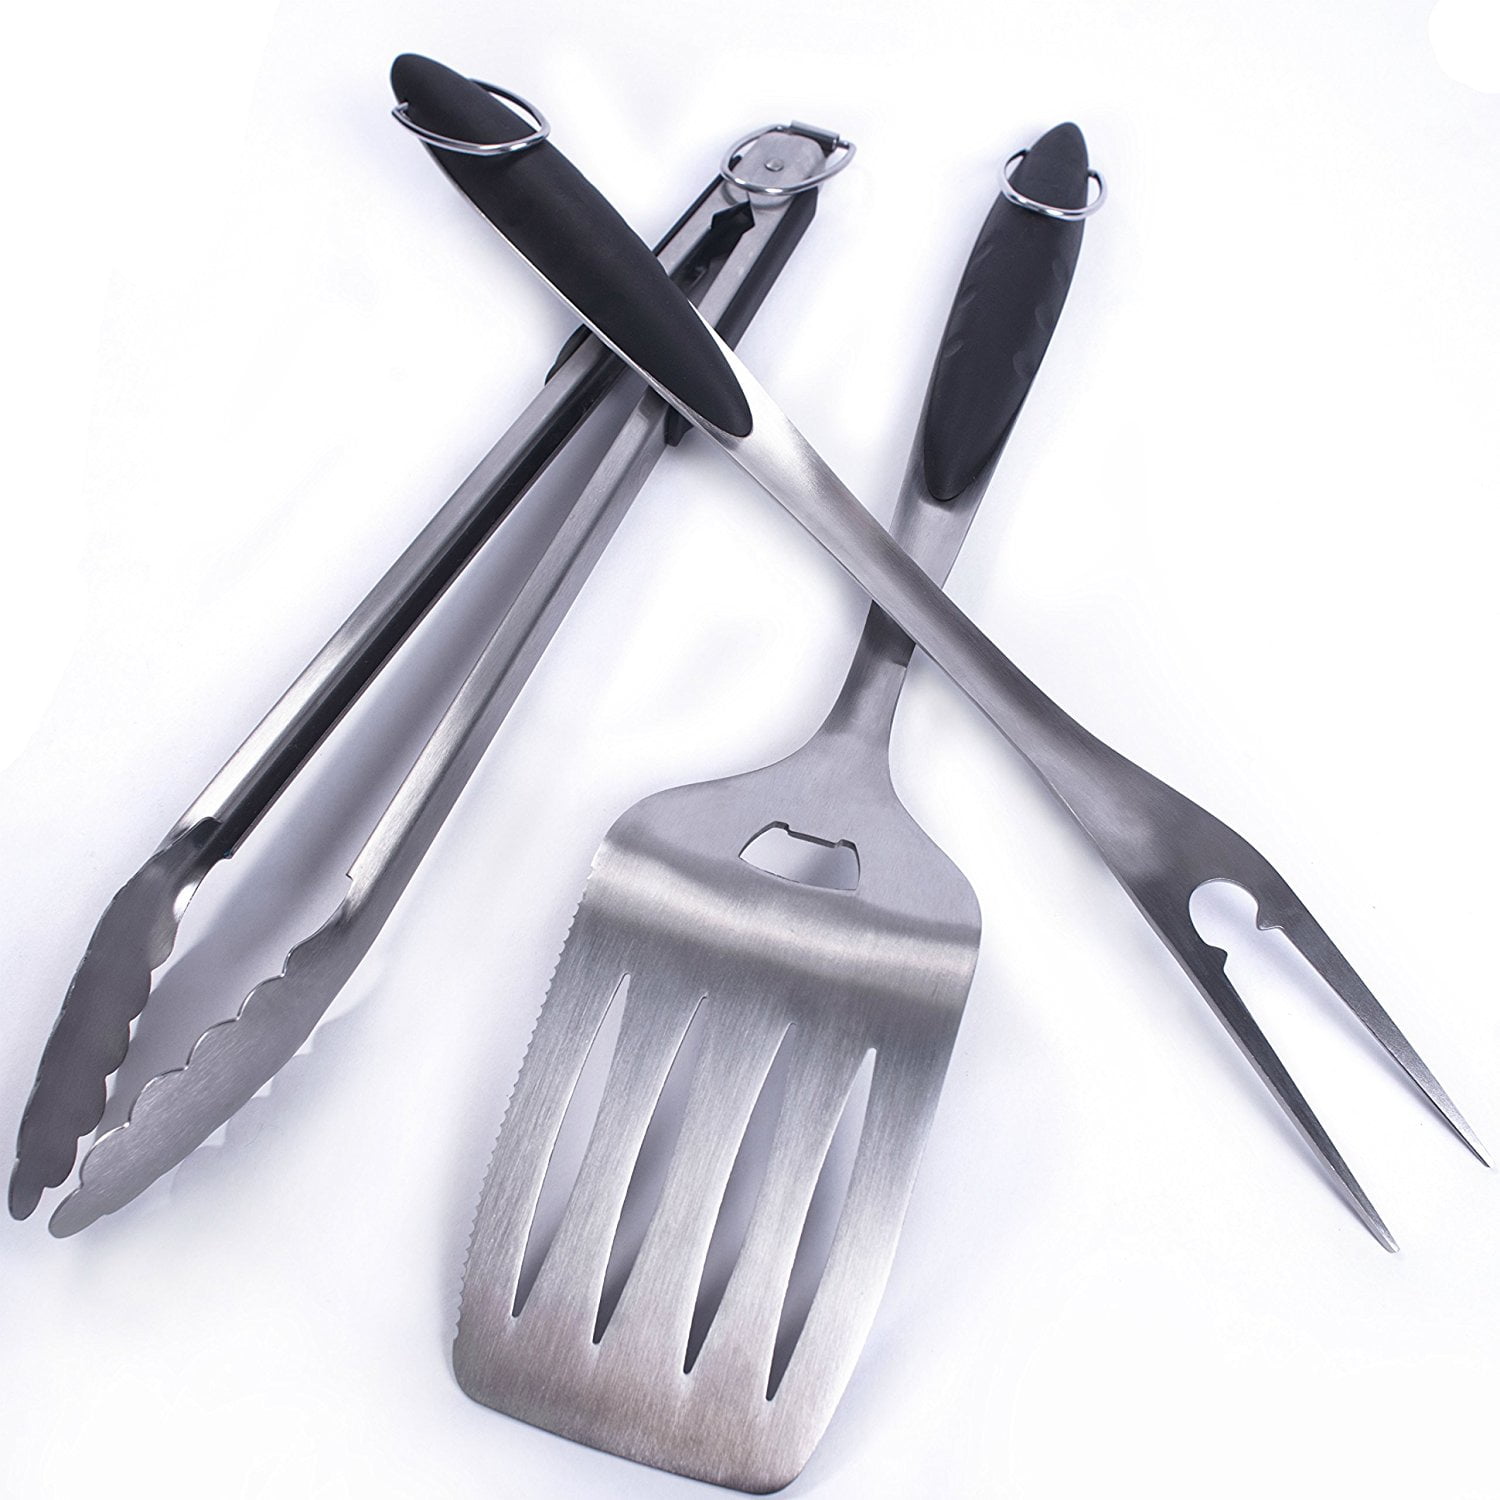 Grilling Utensils (4 piece Hayco Set)/Pampered Chef Spatula, Forever Sharp  Knife Set & More - Northern Kentucky Auction, LLC